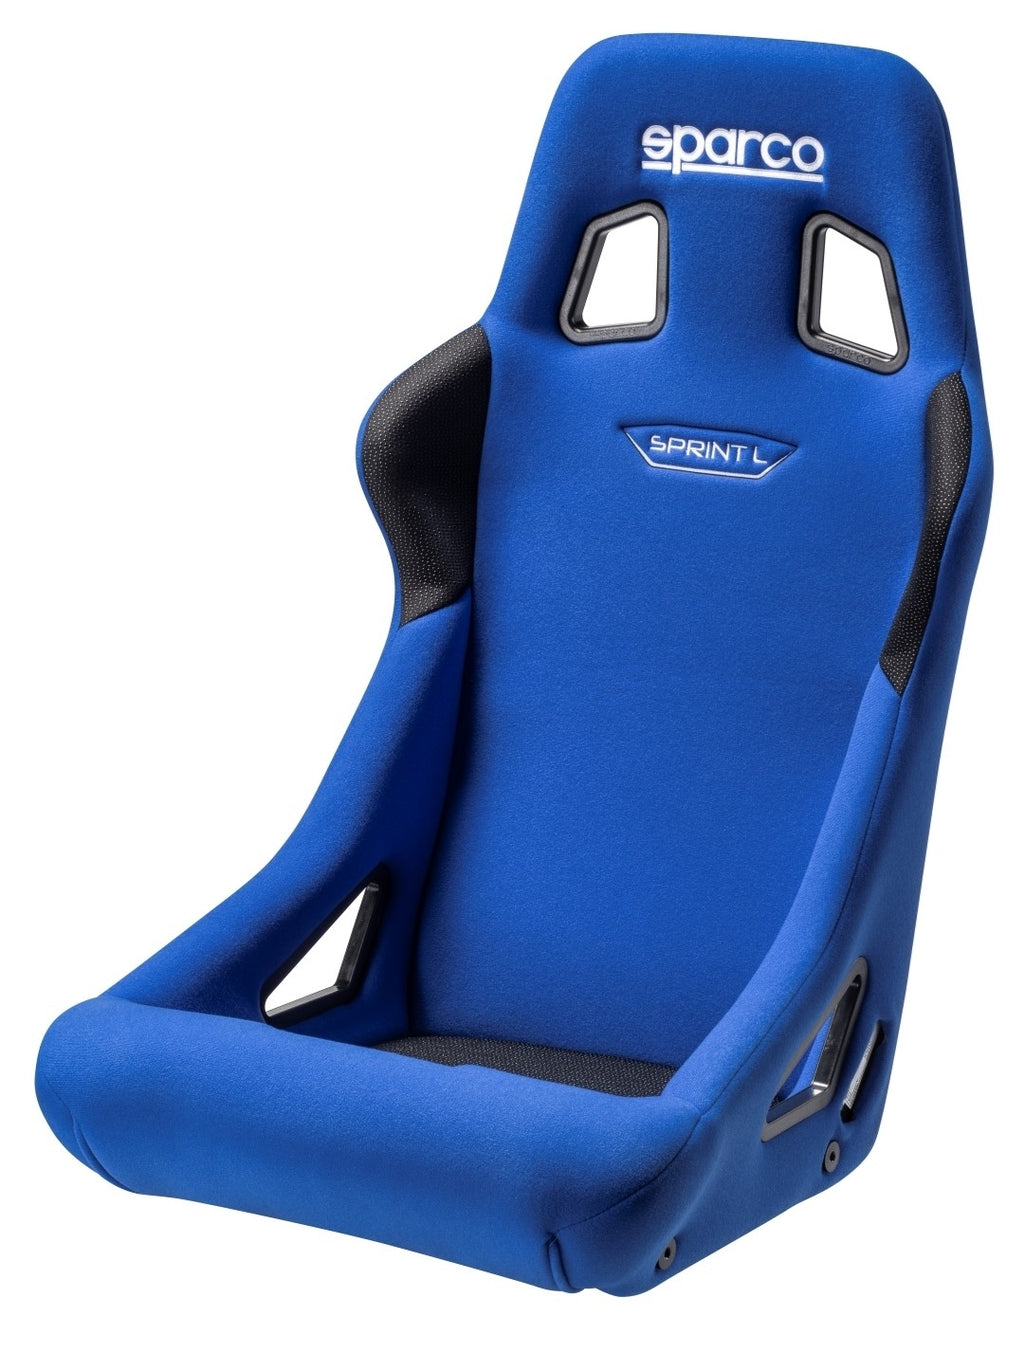 Sparco - Sprint L Competition Seat